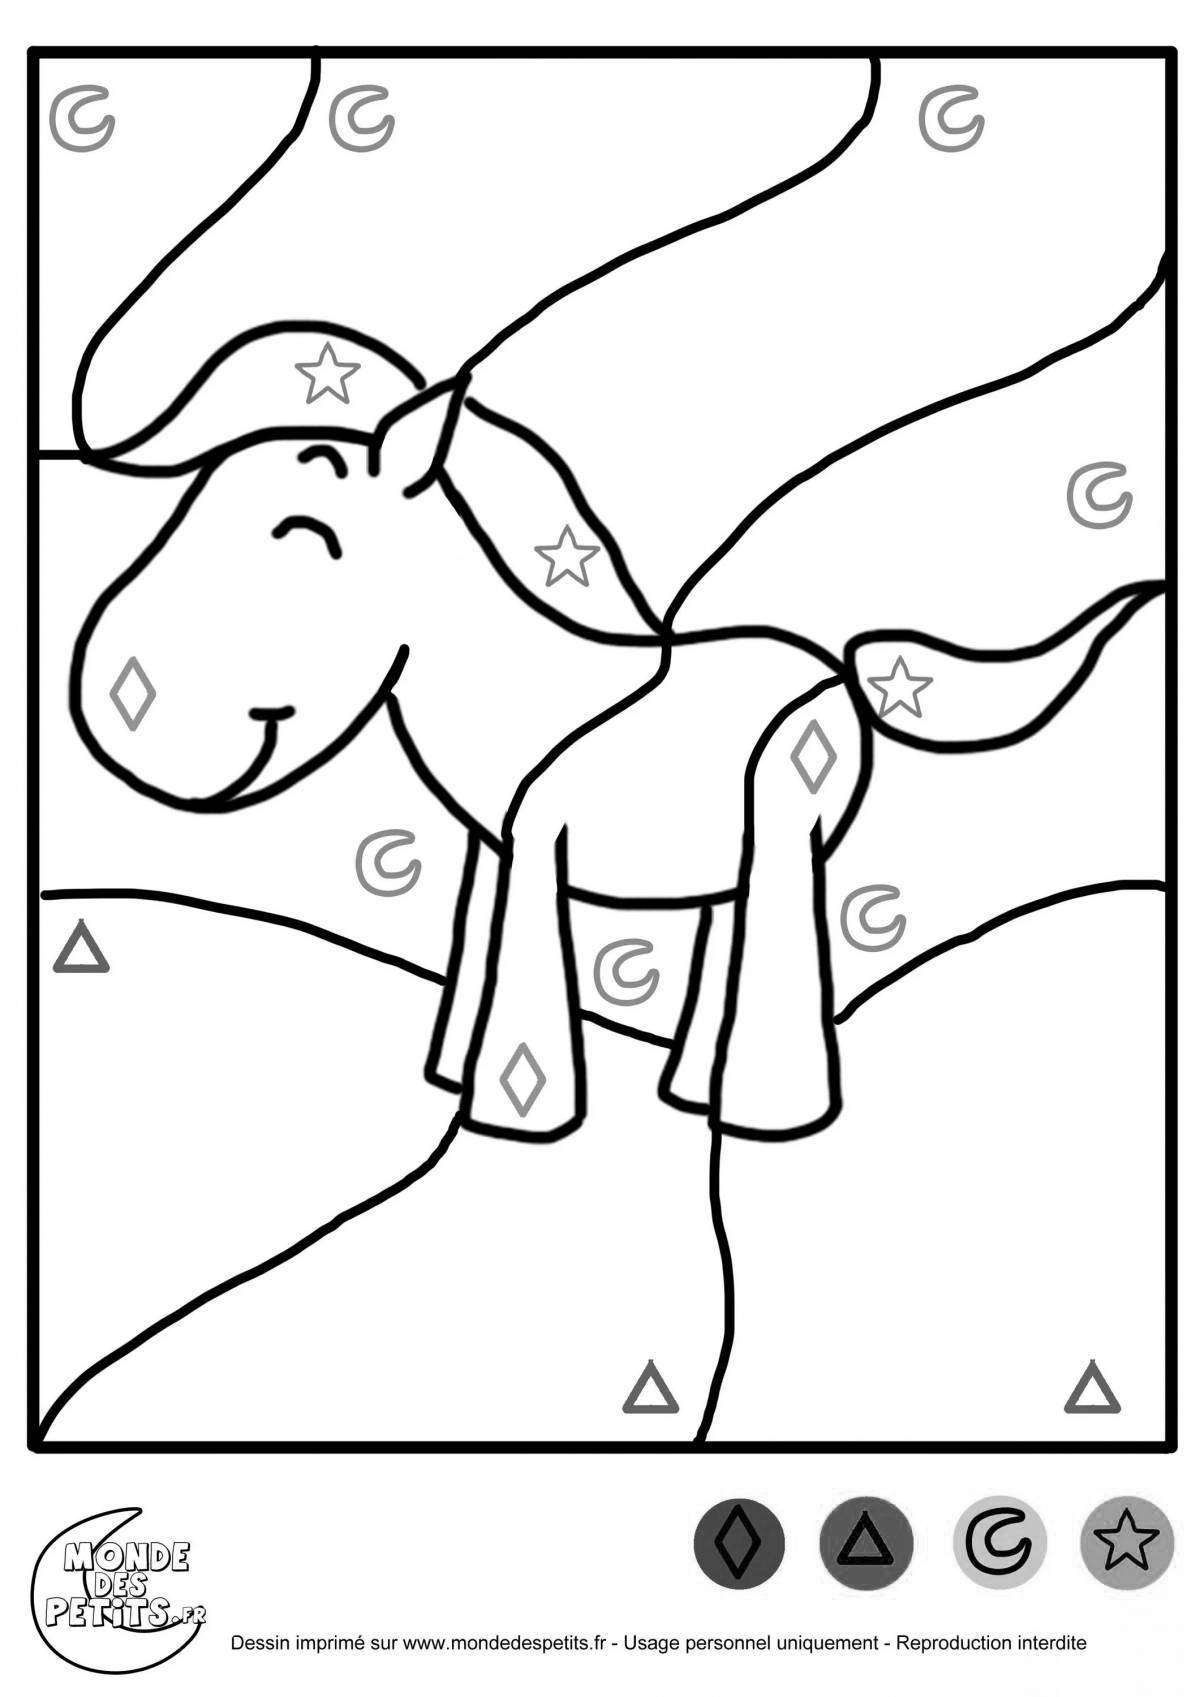 Bright unicorn coloring by numbers